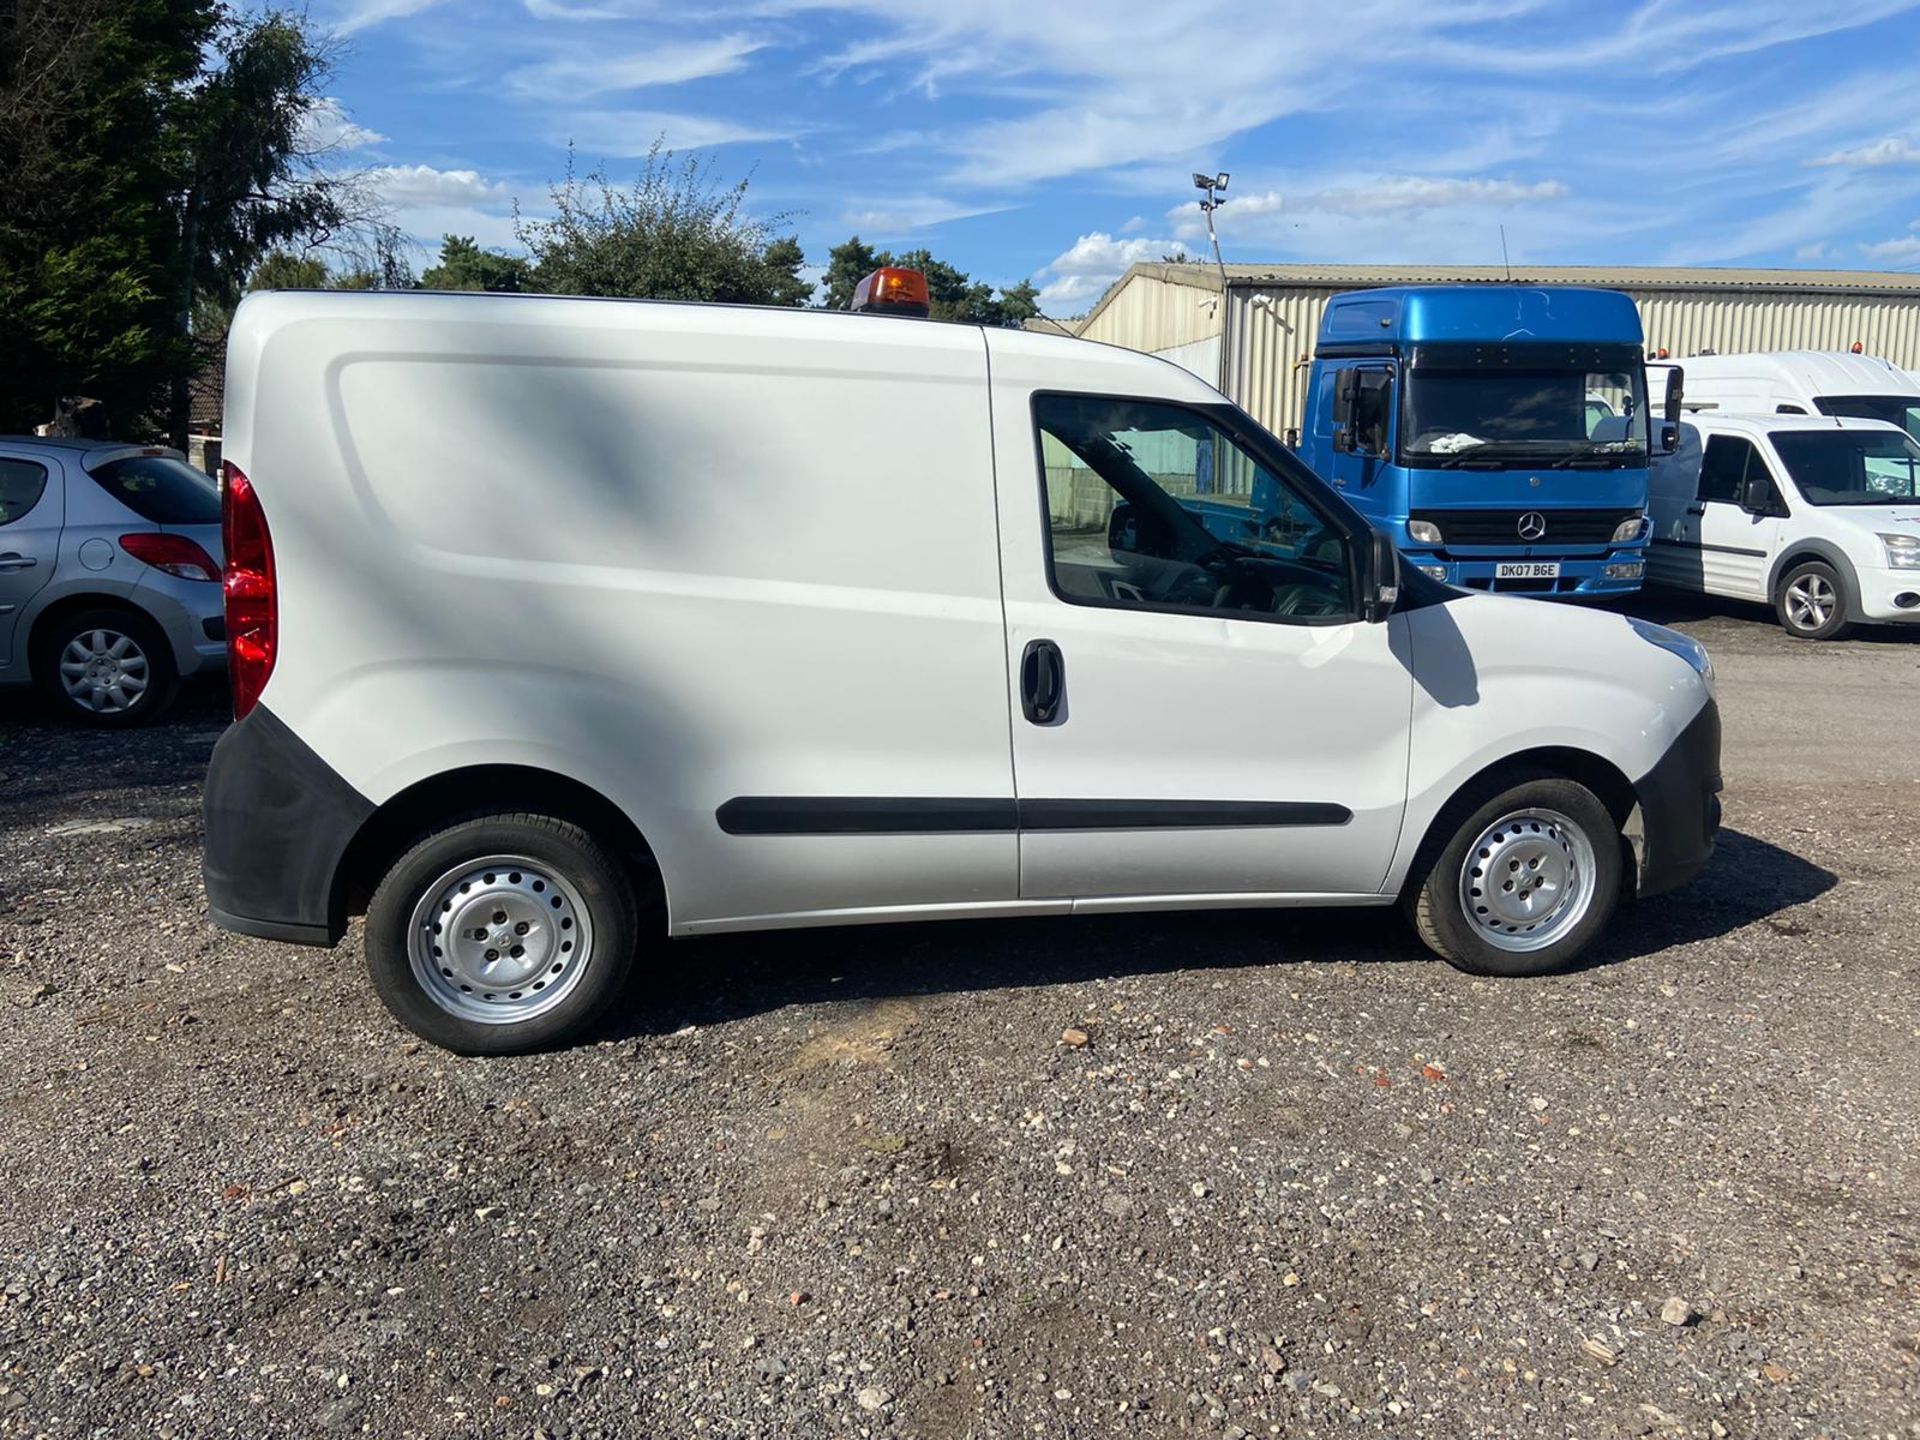 2014/14 REG VAUXHALL COMBO 2000 L1H1 CDTI 1.25 DIESEL WHITE PANEL VAN, SHOWING 0 FORMER KEEPERS - Image 7 of 9